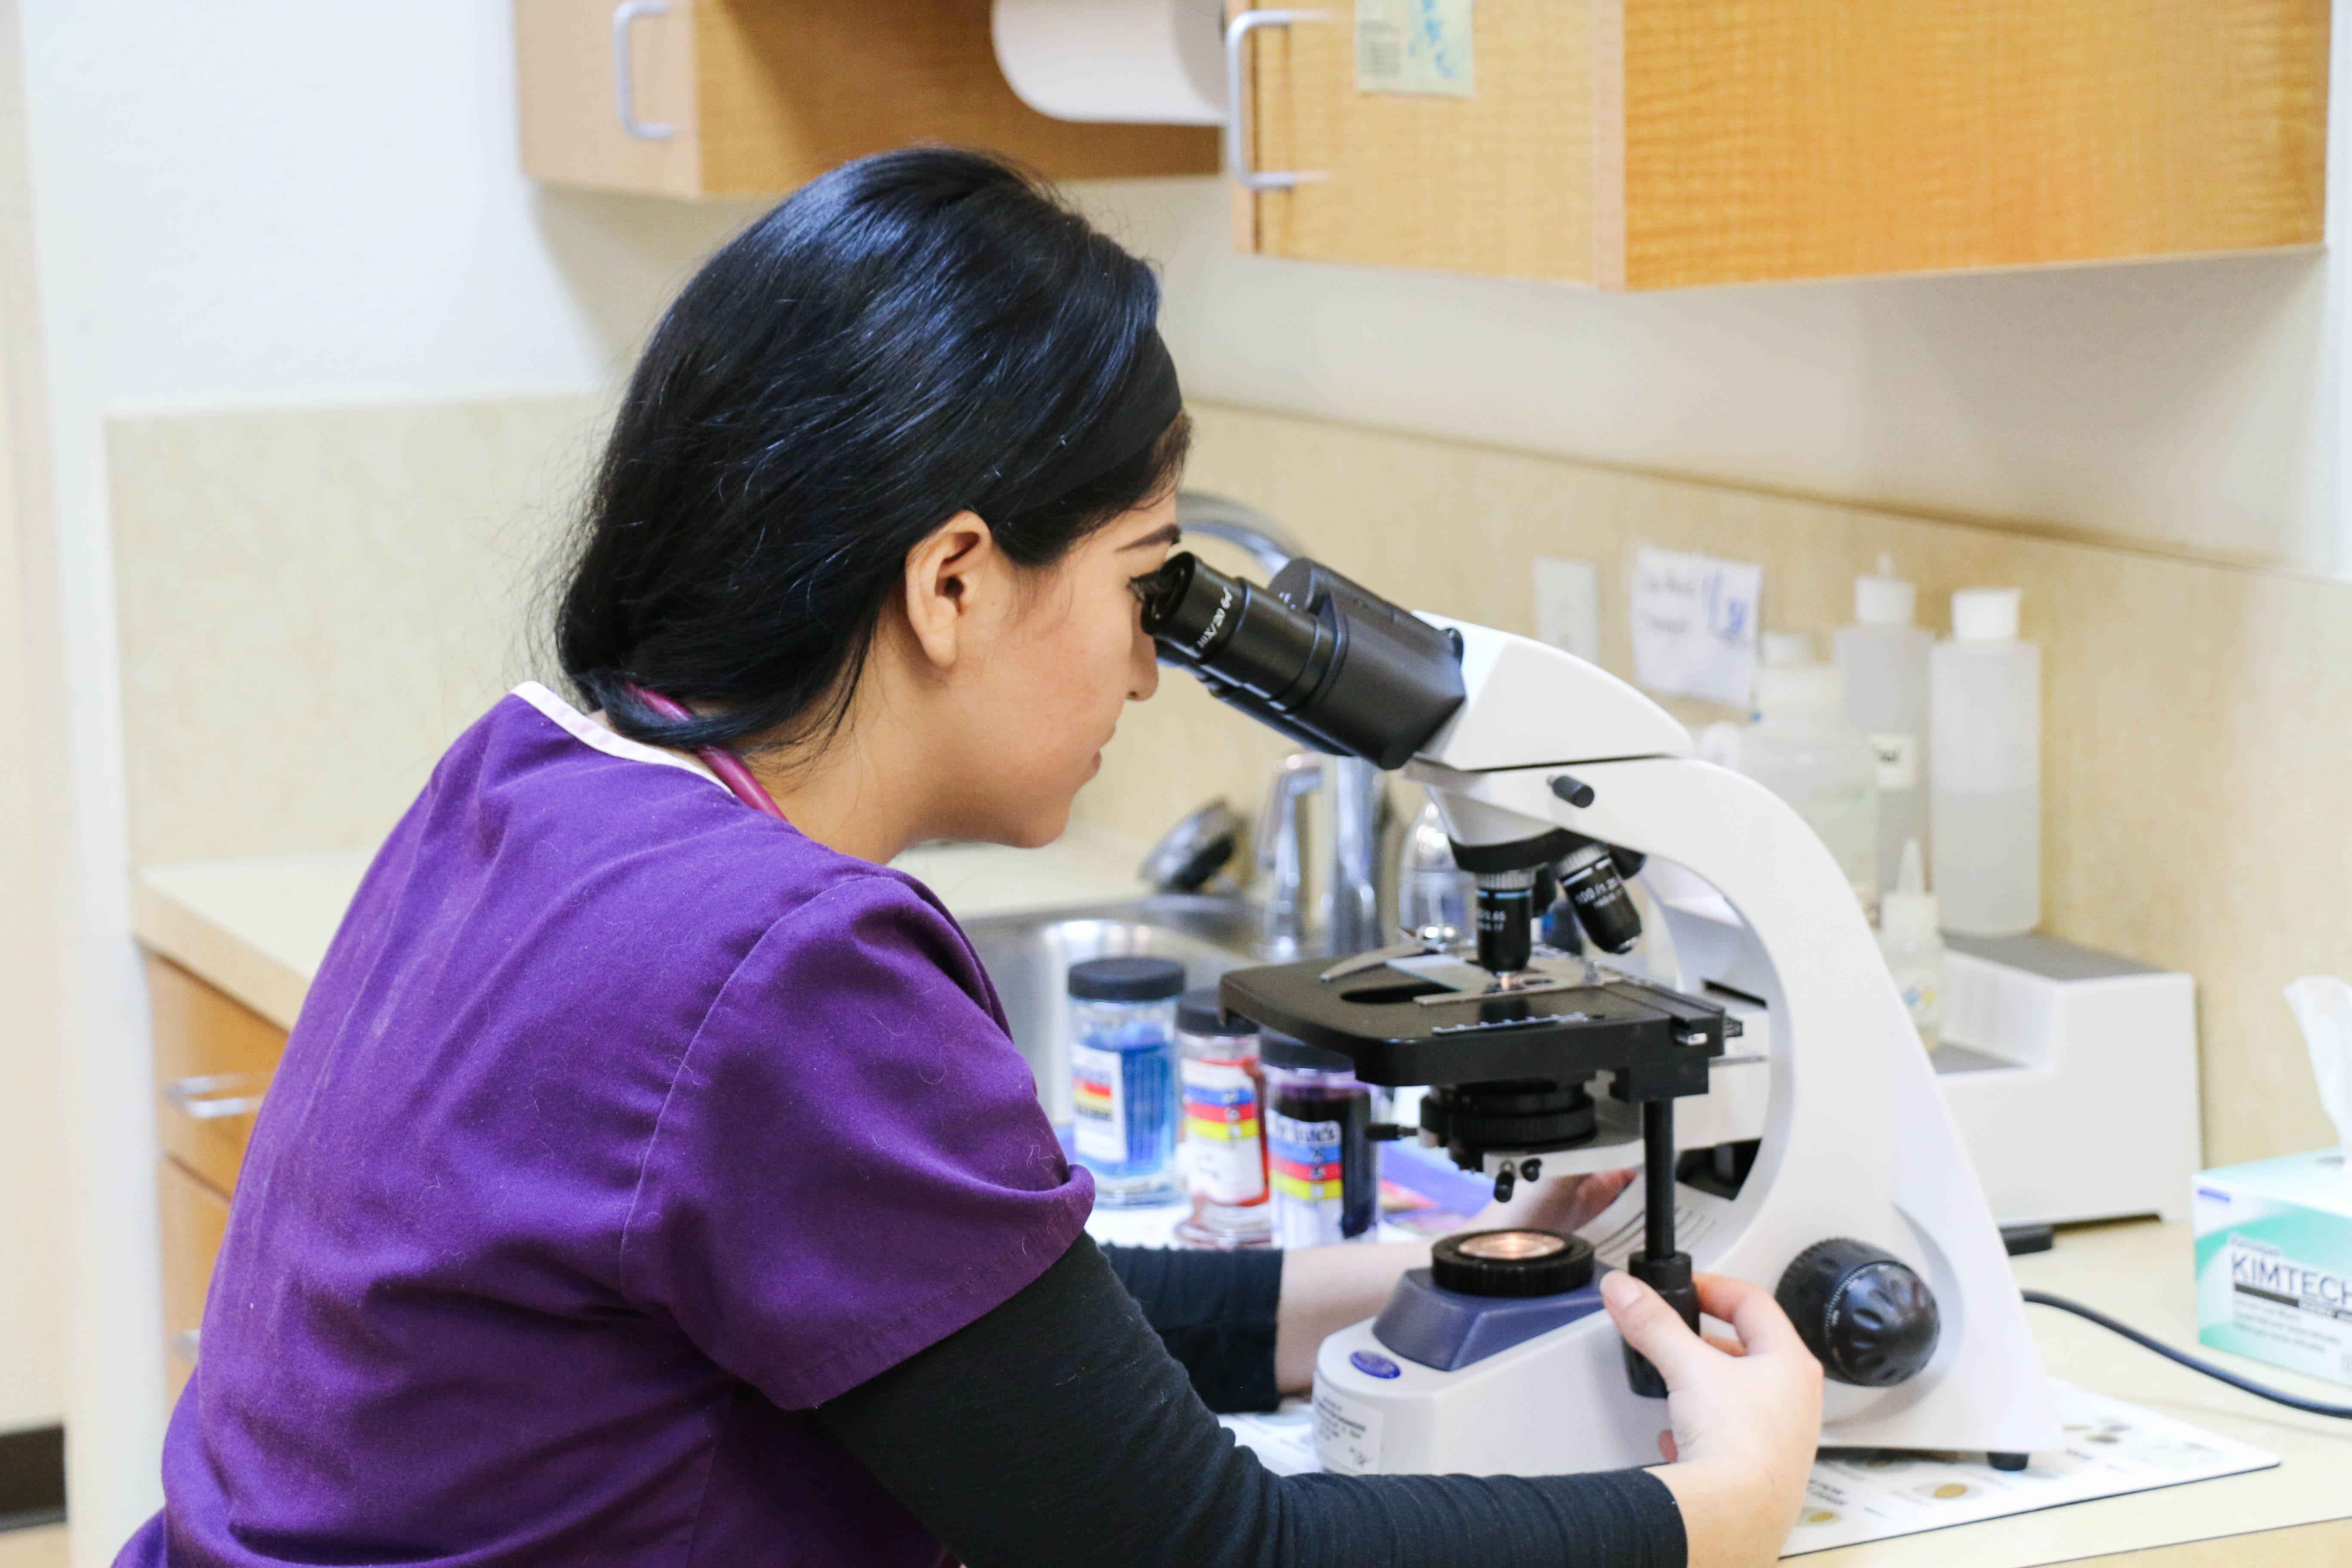 A veterinary technician examines a sample using a microscope in our convenient, fully equipped in-house lab. We are able to perform urinalysis, parasite testing, fungal cultures, blood work, and much more.